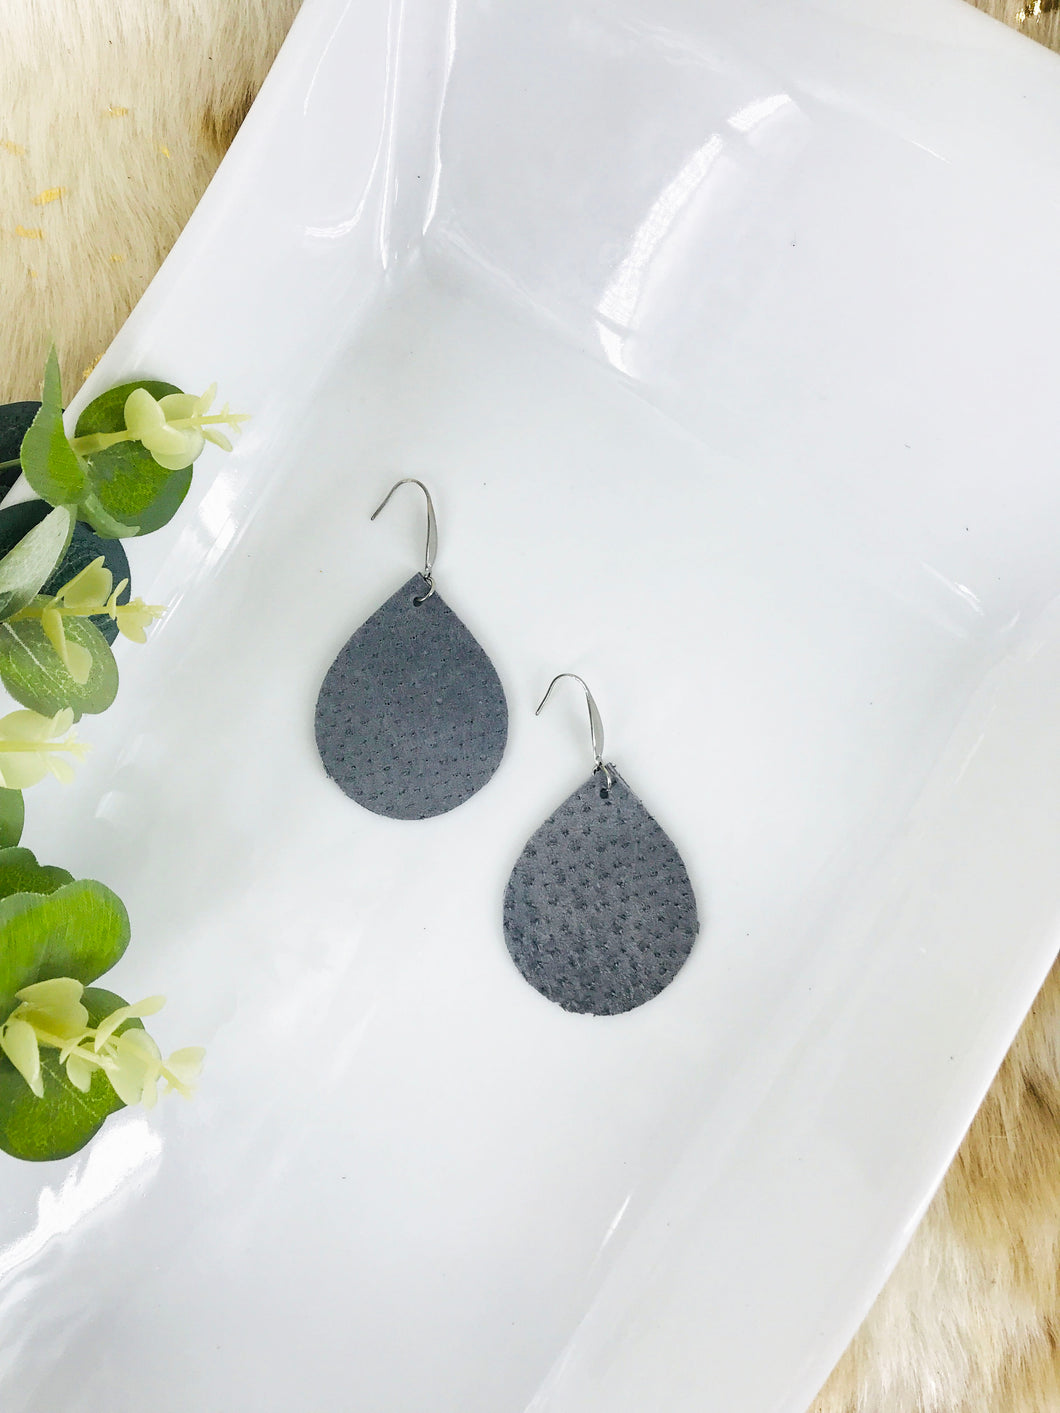 Youth Size Genuine Leather Earrings - E19-1258